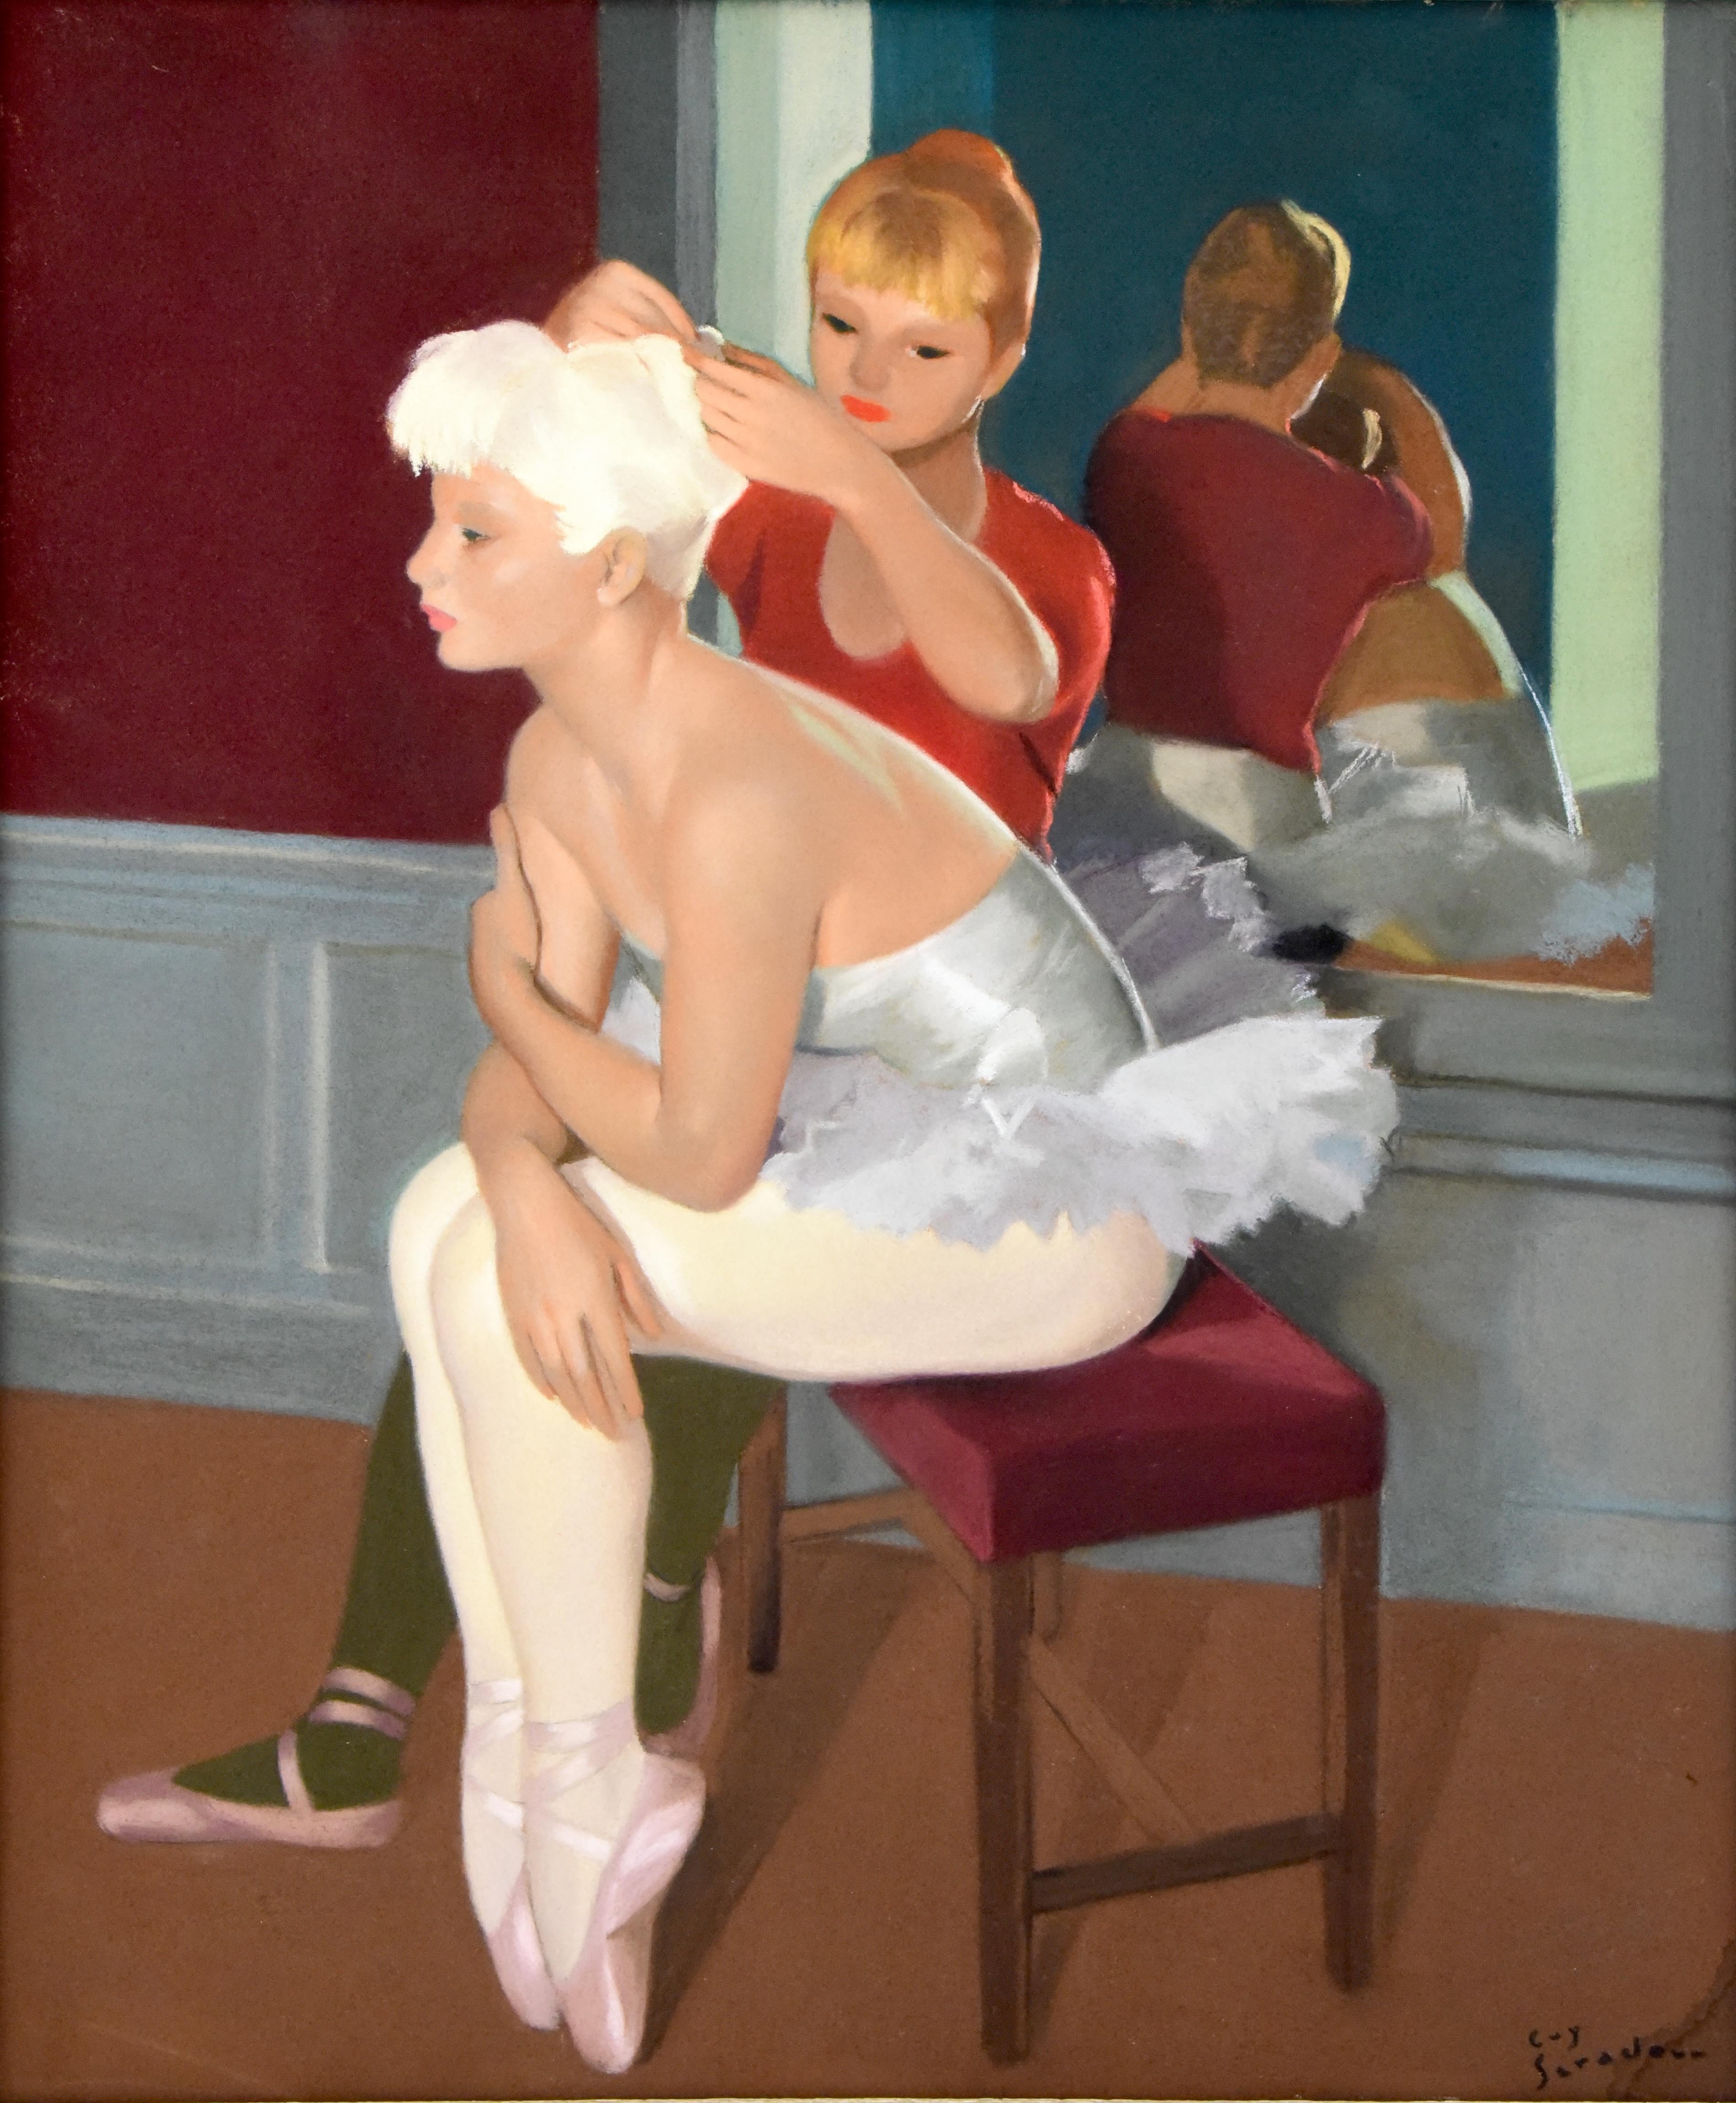 Gouache painting of two young ballerina girls who are preparing for a performance. One dressed in a tutu is sitting in a chair while her friend helps with her hairdo. The gouache has beautiful colors and the original frame. The work is signed by Guy